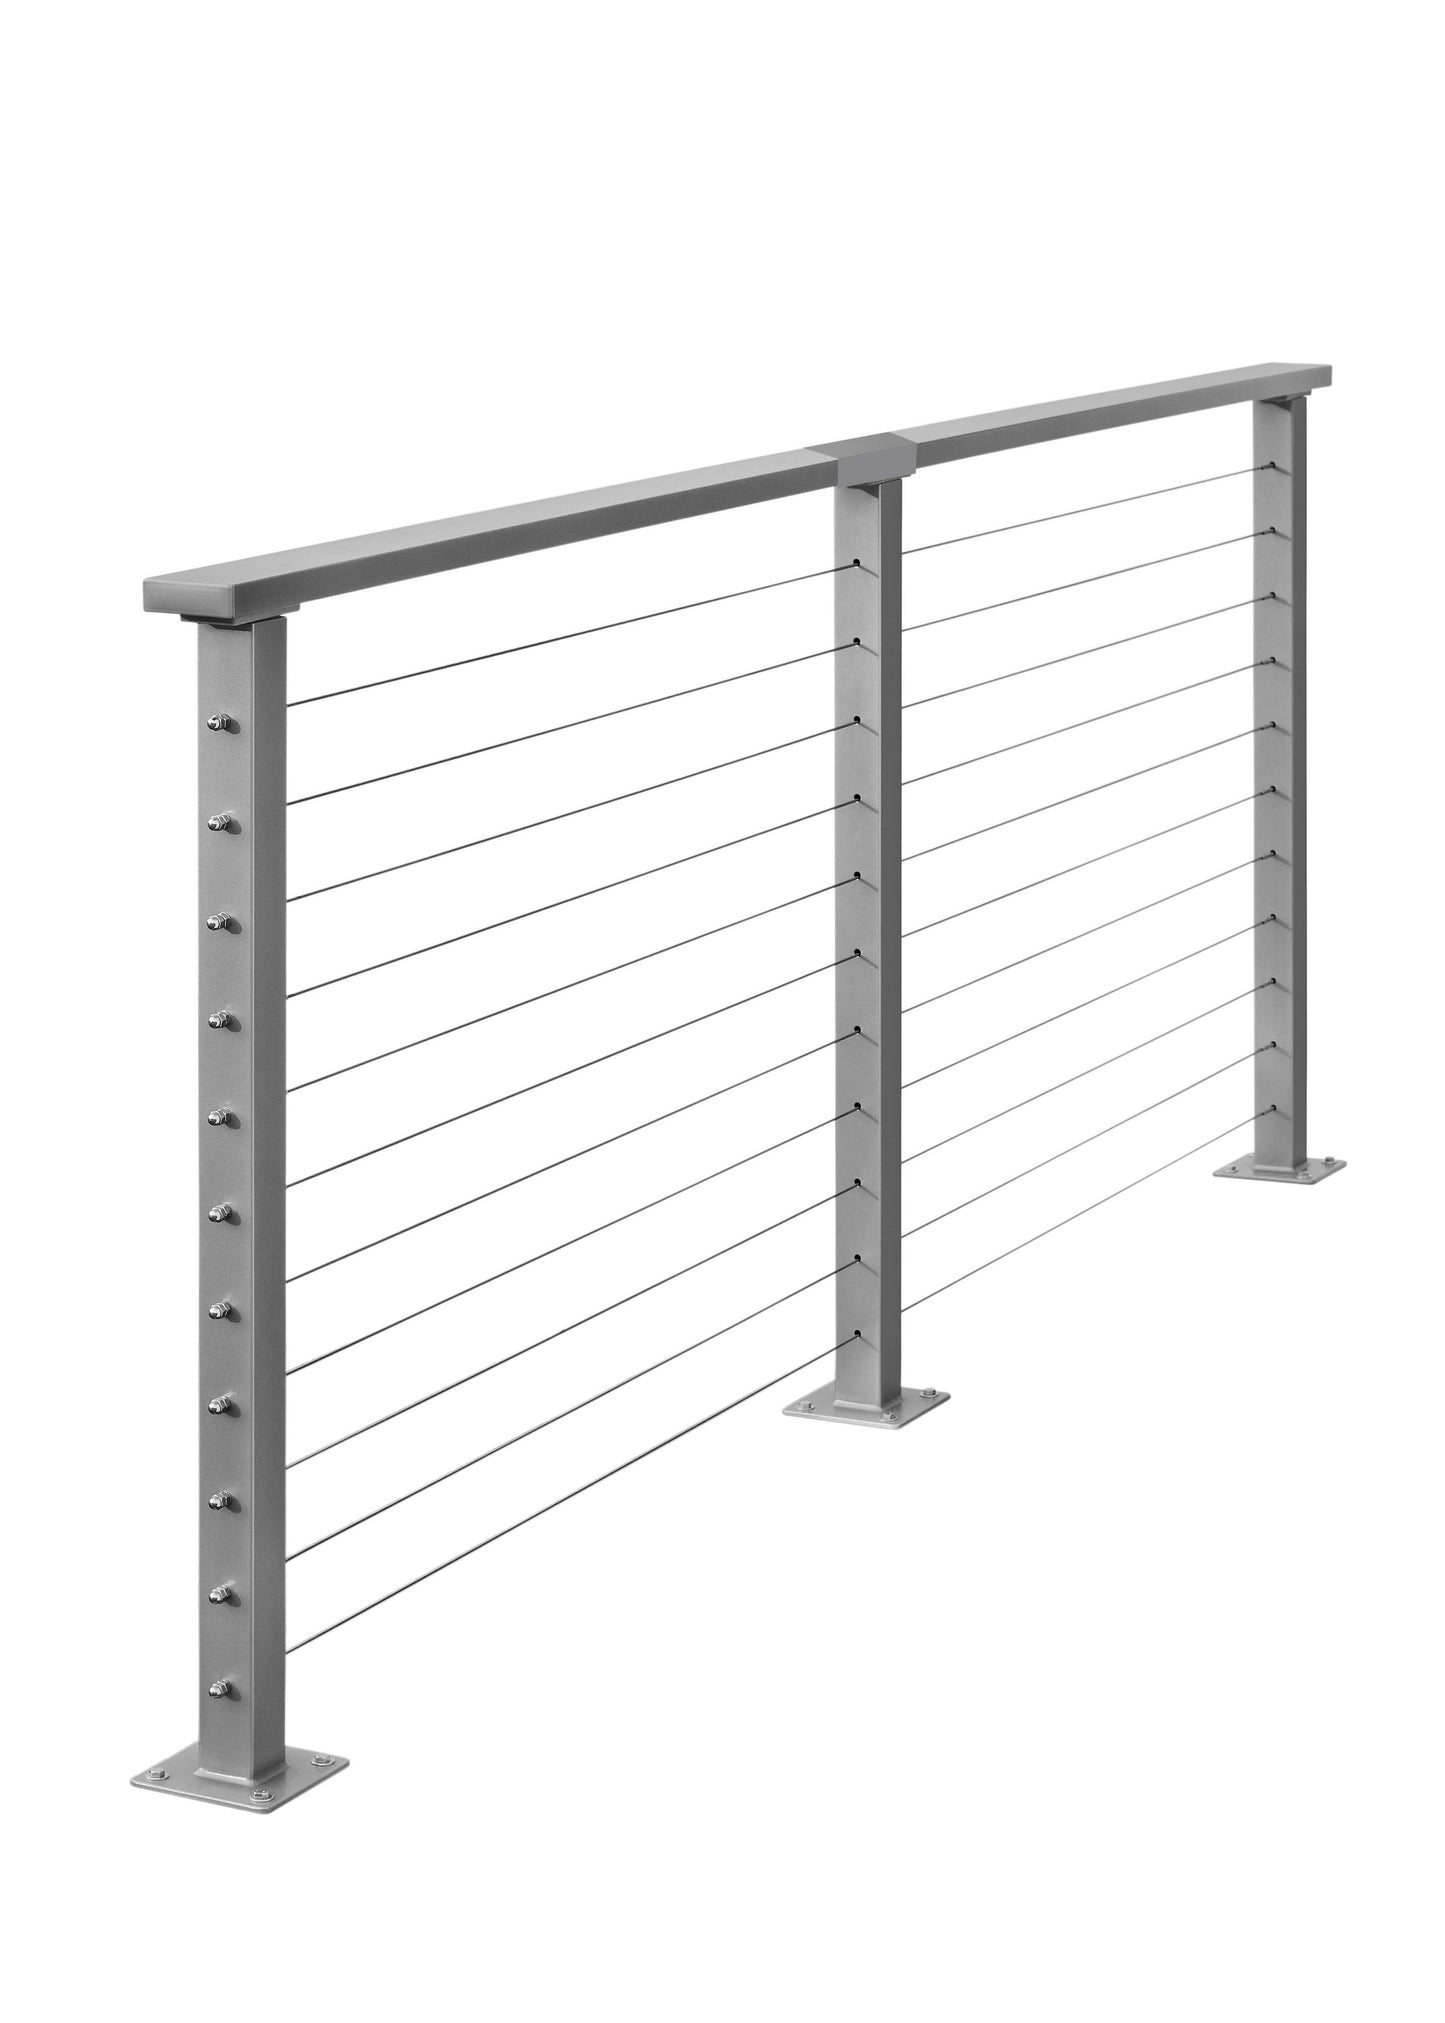 8 ft. Deck Cable Railing in Grey , Stainless